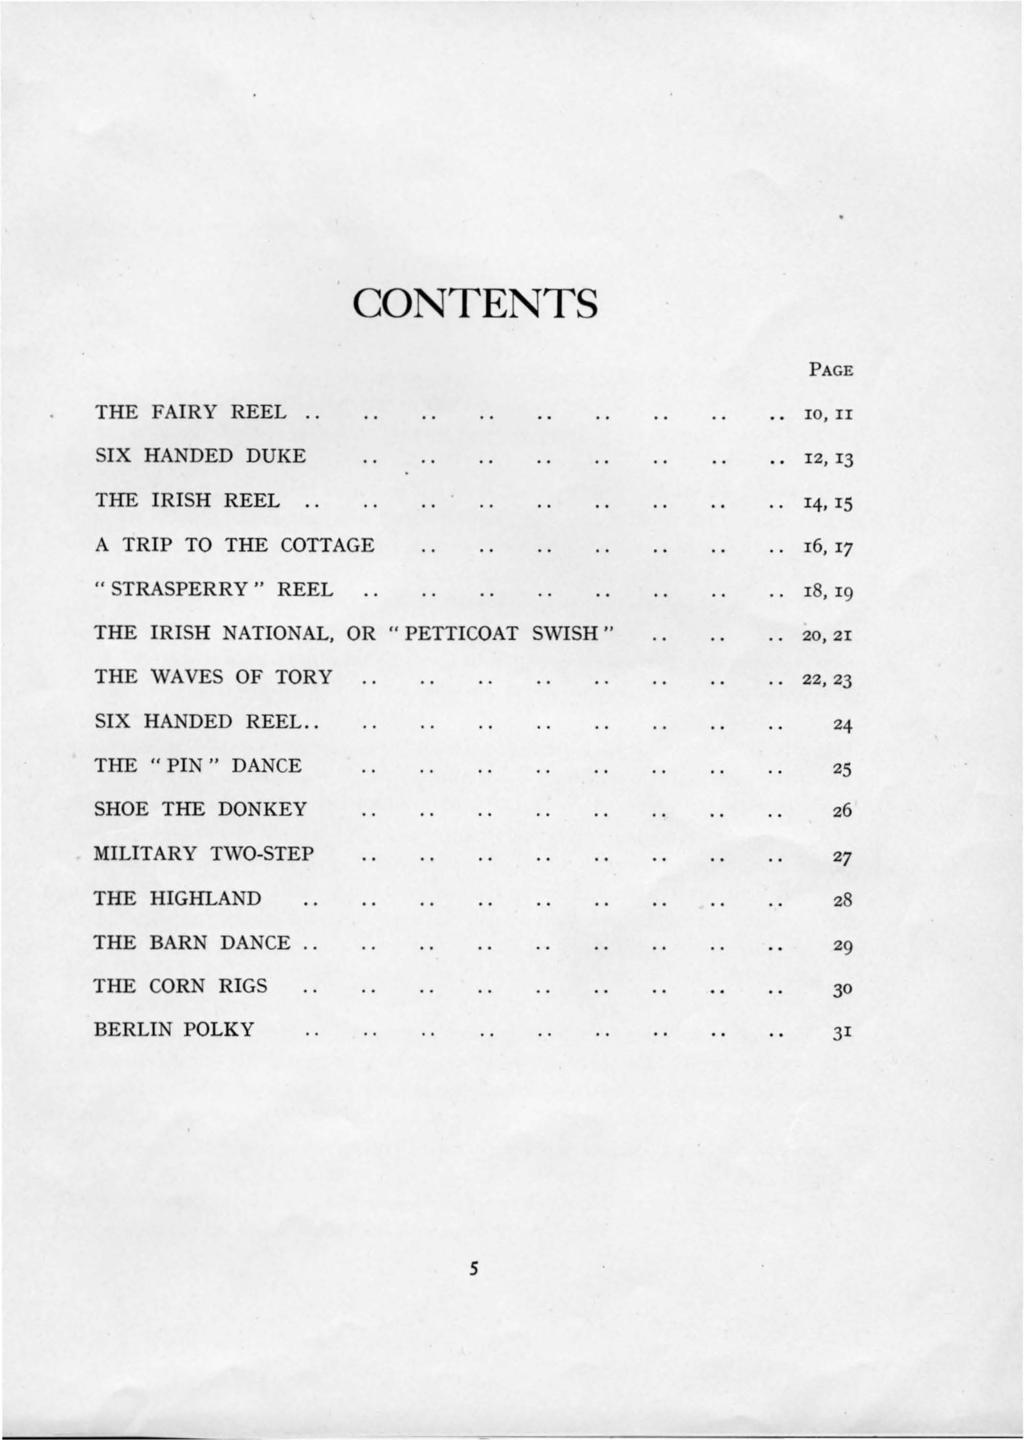 CONTENTS PAGE THE FAIRY REEL.. SIX HANDED DUKE THE IRISH REEL.. A TRIP TO THE COTTAGE "STRASPERRY" REEL THE IRISH NATIO AL, OR "PETTICOAT SWISH" THE WAVES OF TORY SIX HANDED REEL.